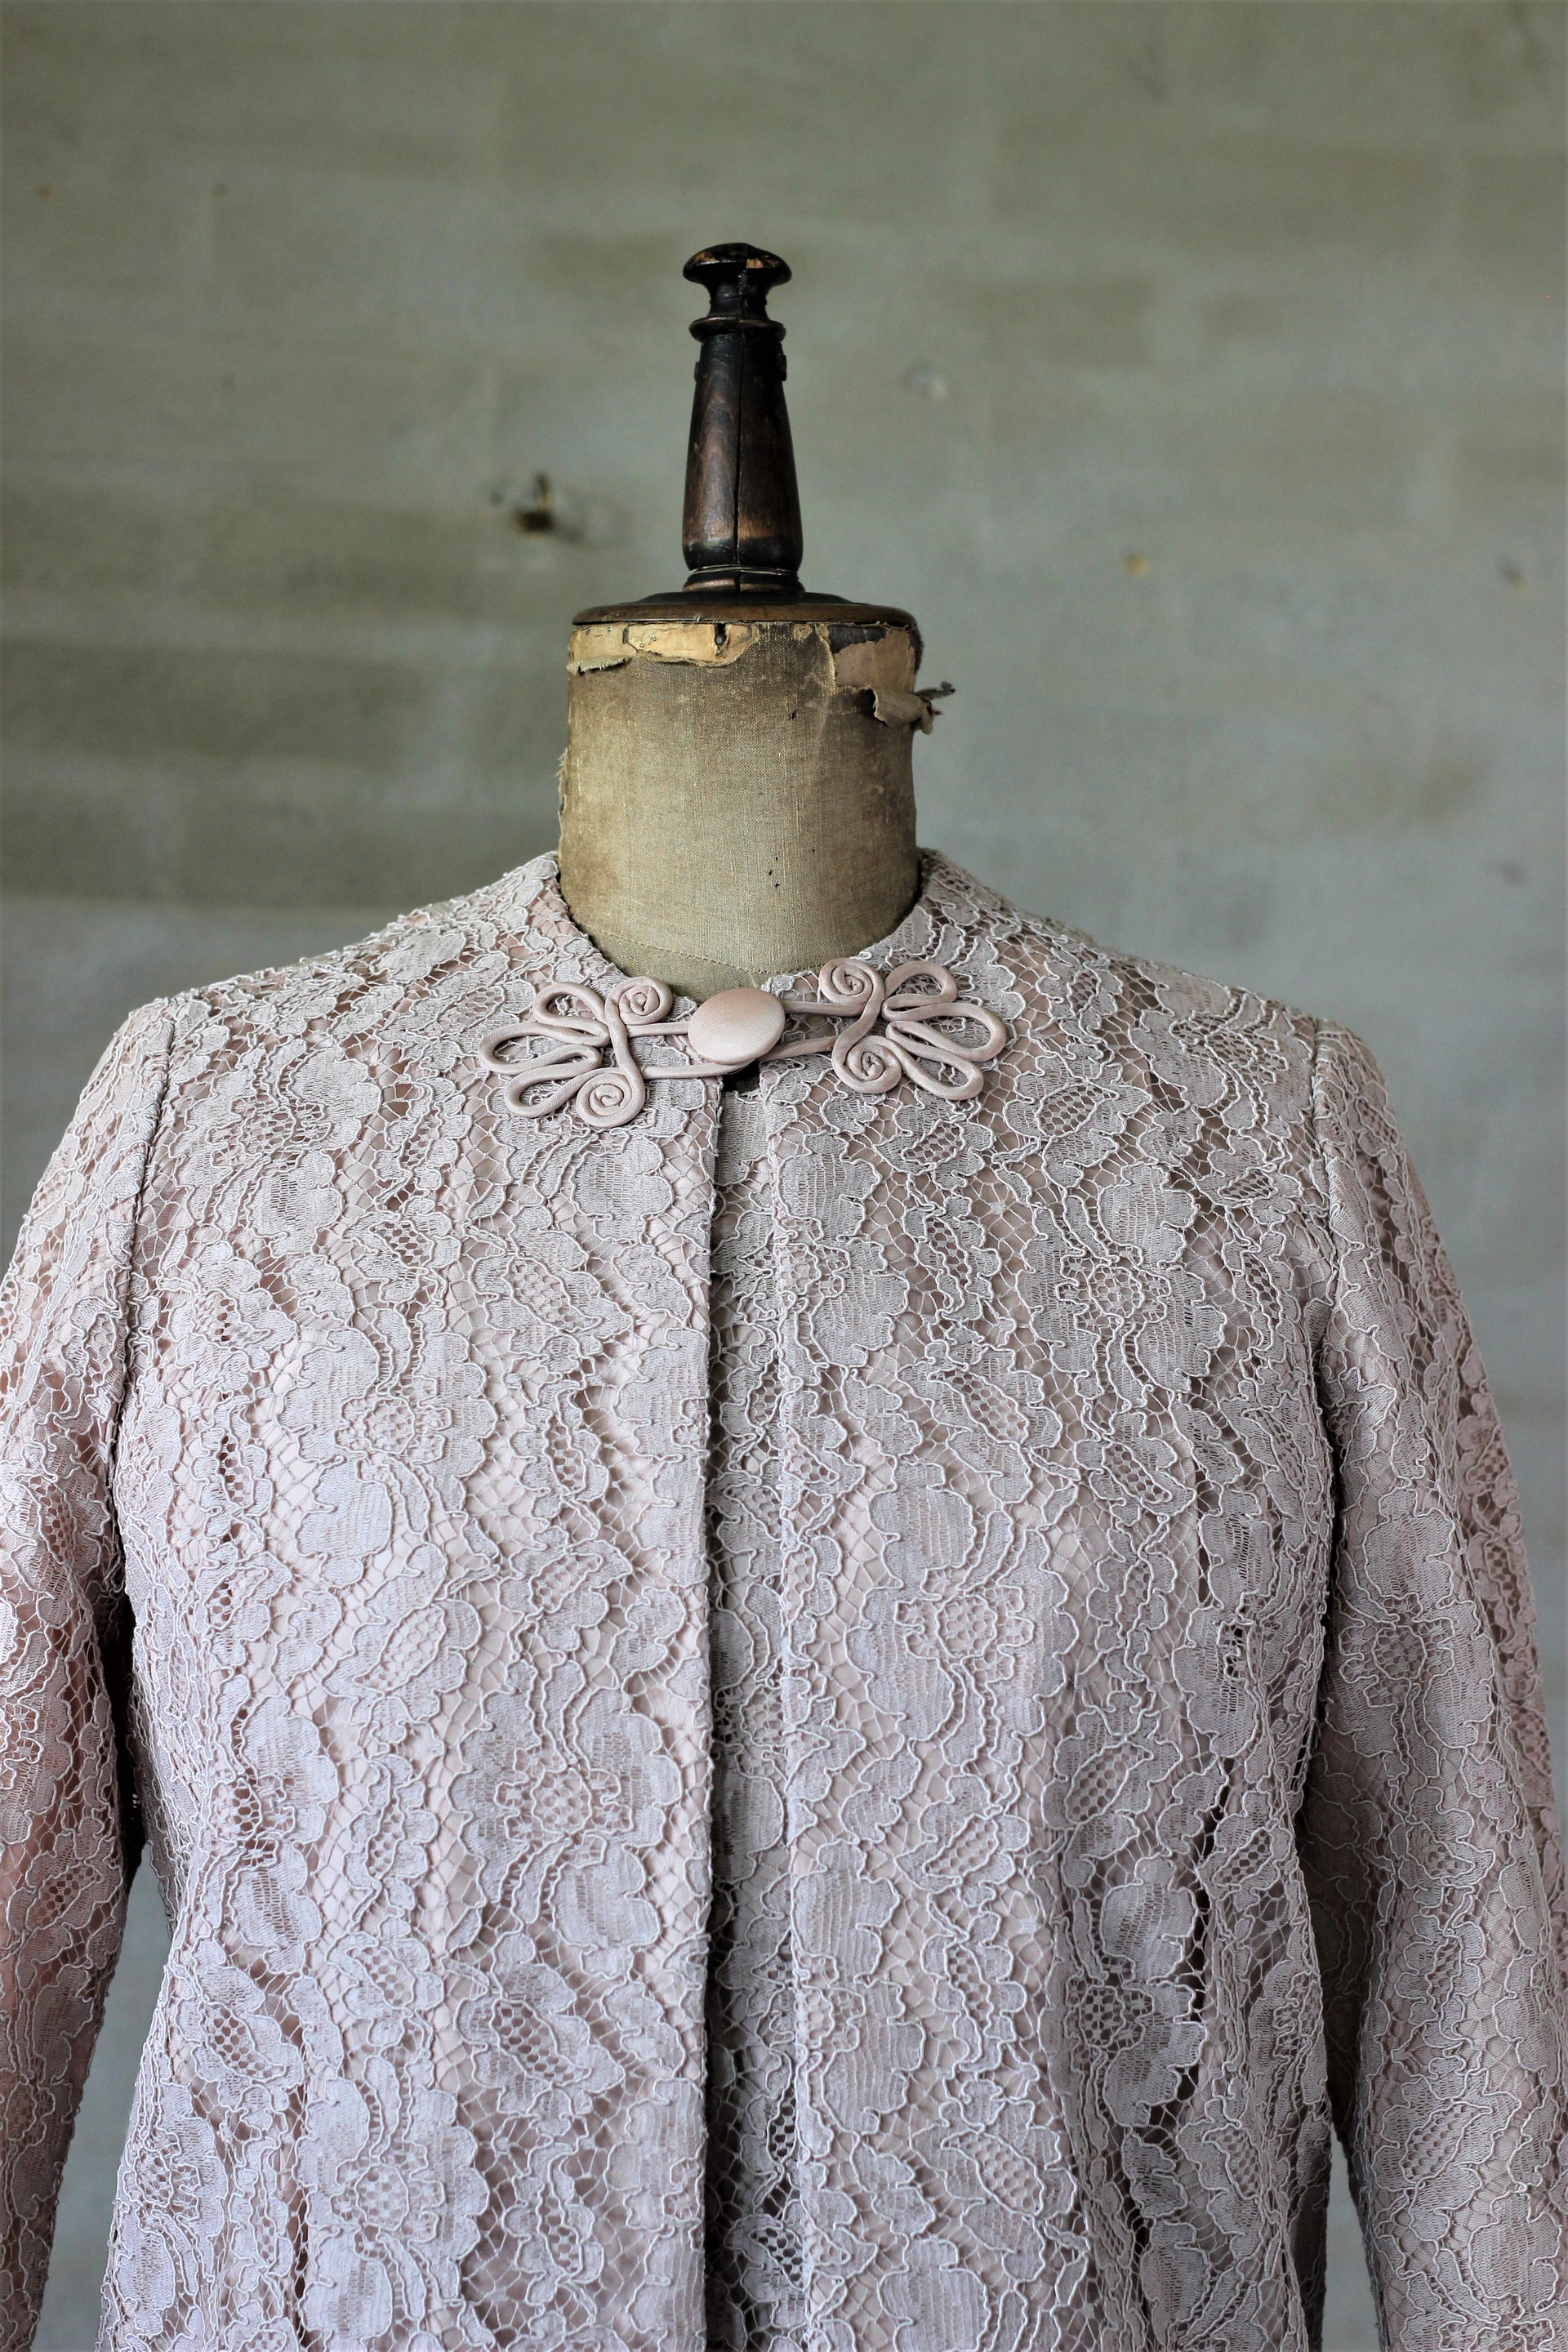 1960s Vintage Pale Rose Lace Two Piece/Dress and Jacket